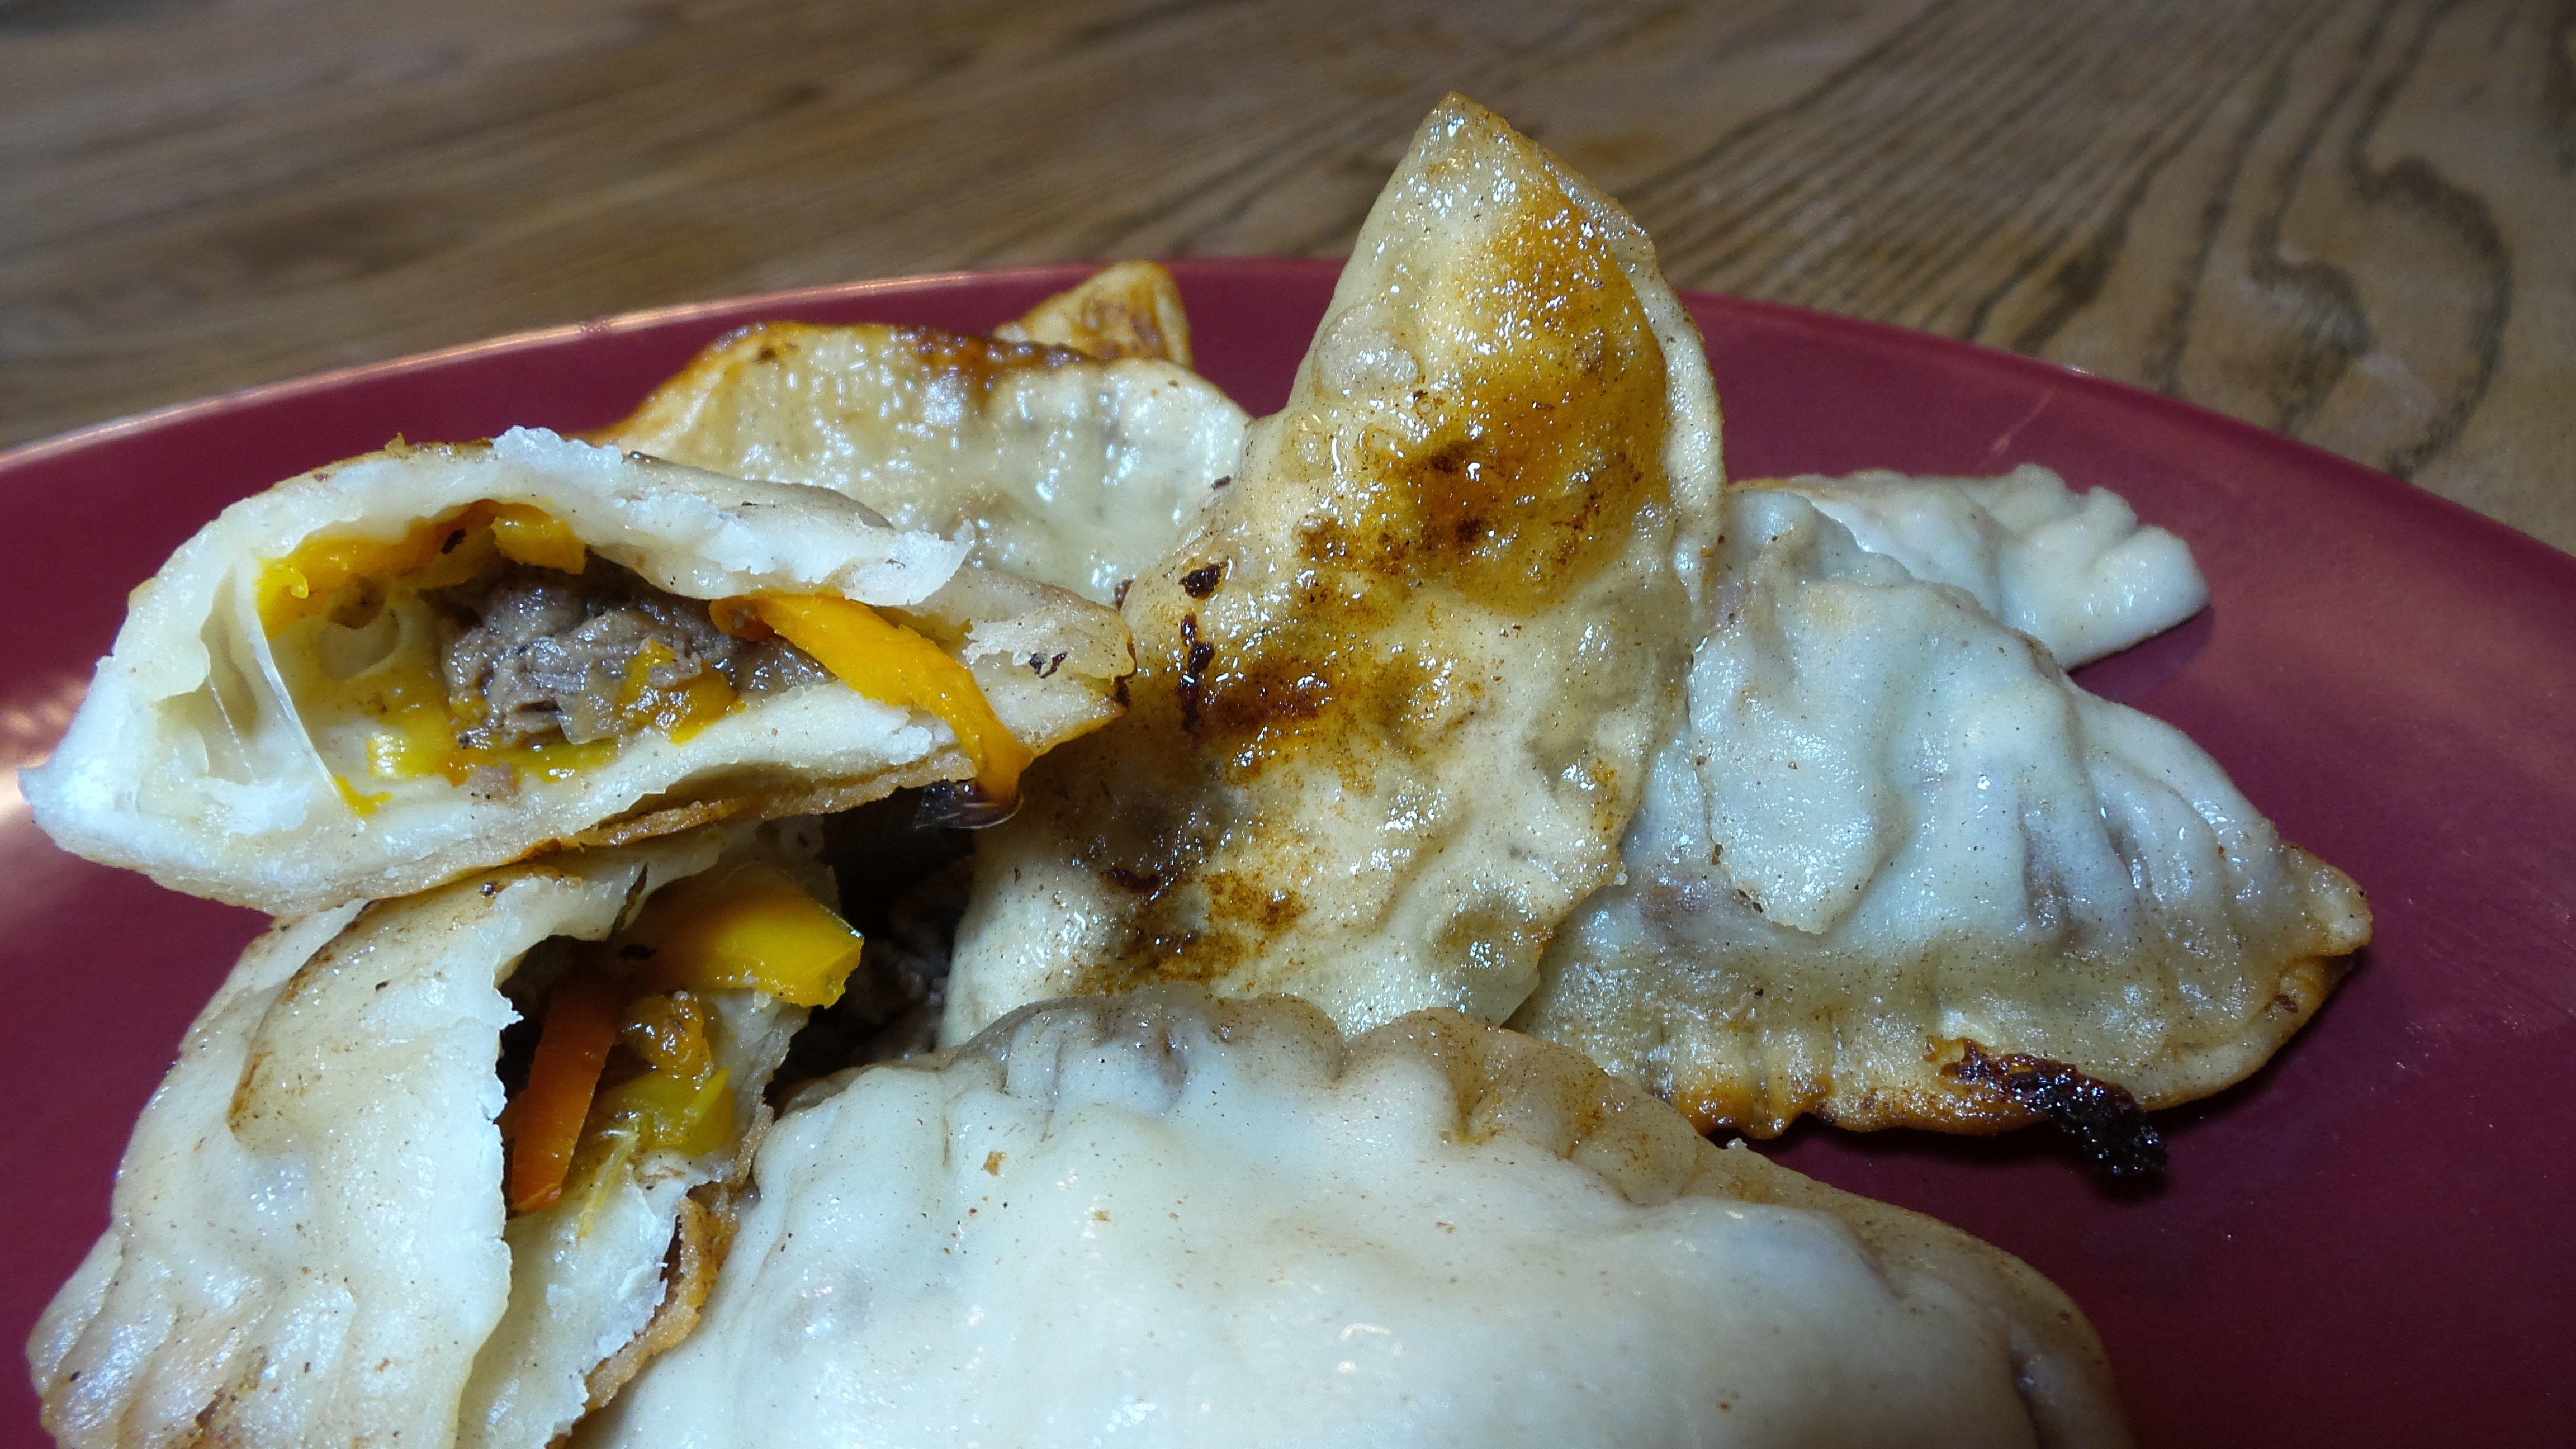 Philly Cheesesteak Pot Stickers make a great game day snack or main course.